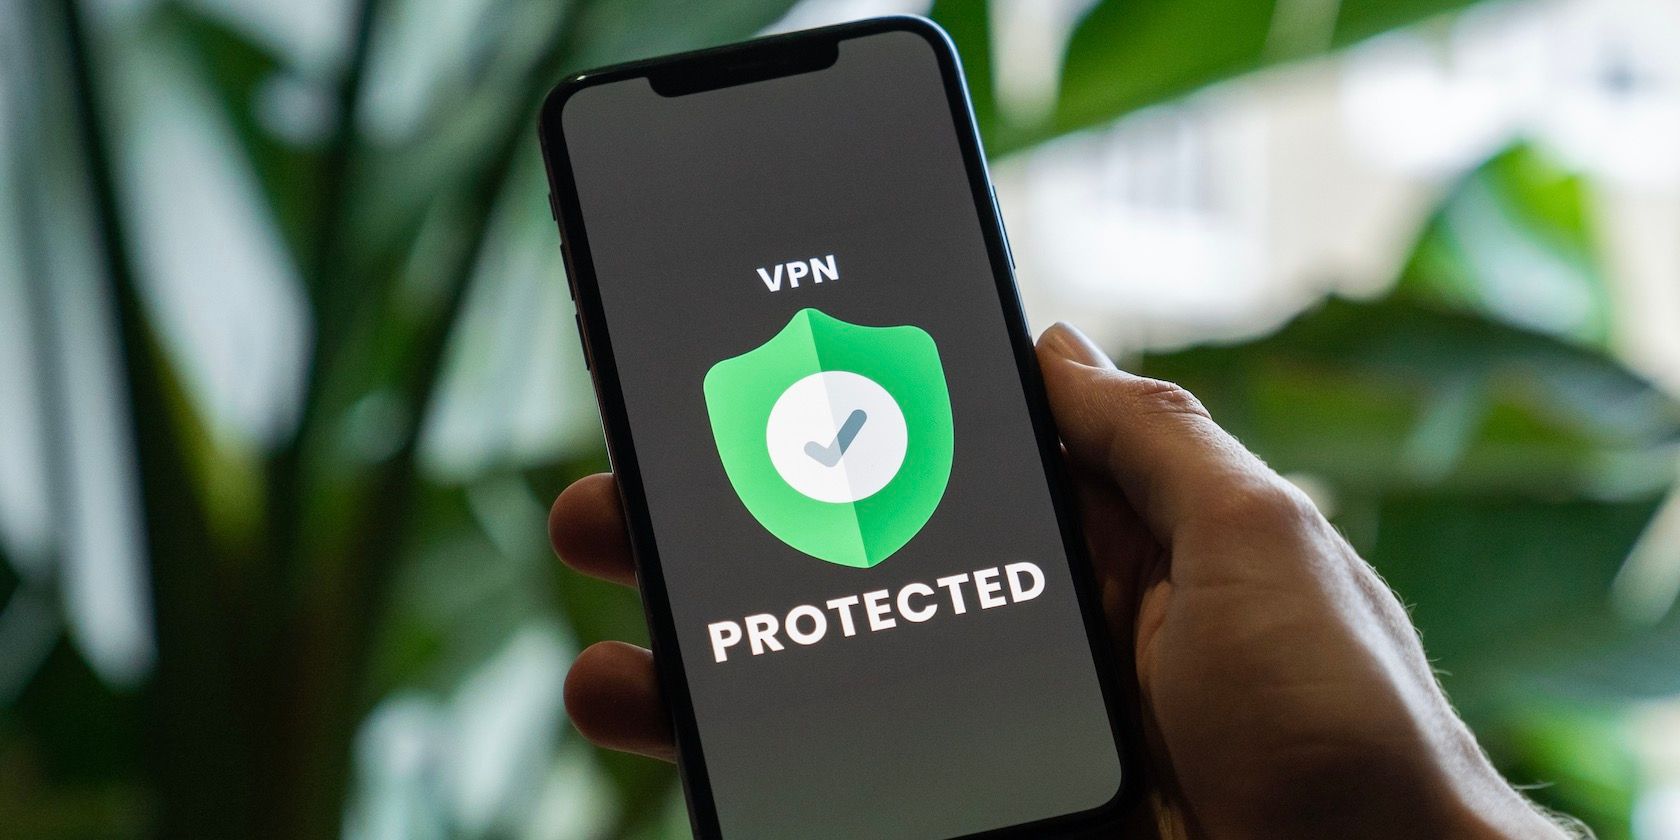 iPhone showing VPN privacy icon